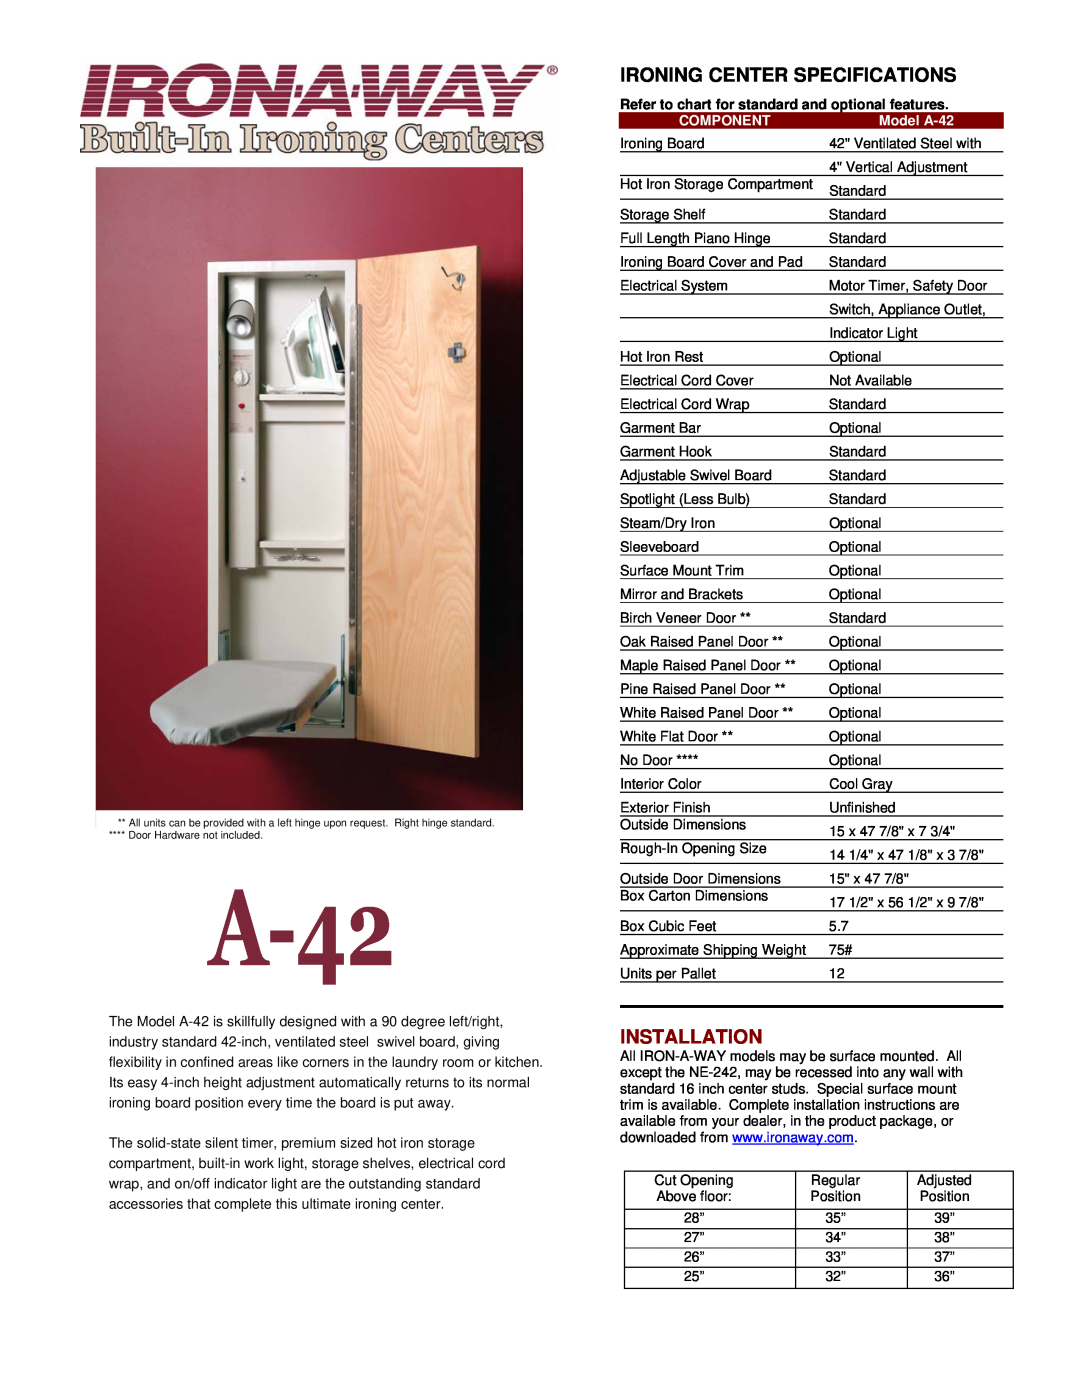 Iron-A-Way A-42 manual Ironing Center Specifications, Installation, Refer to chart for standard and optional features 